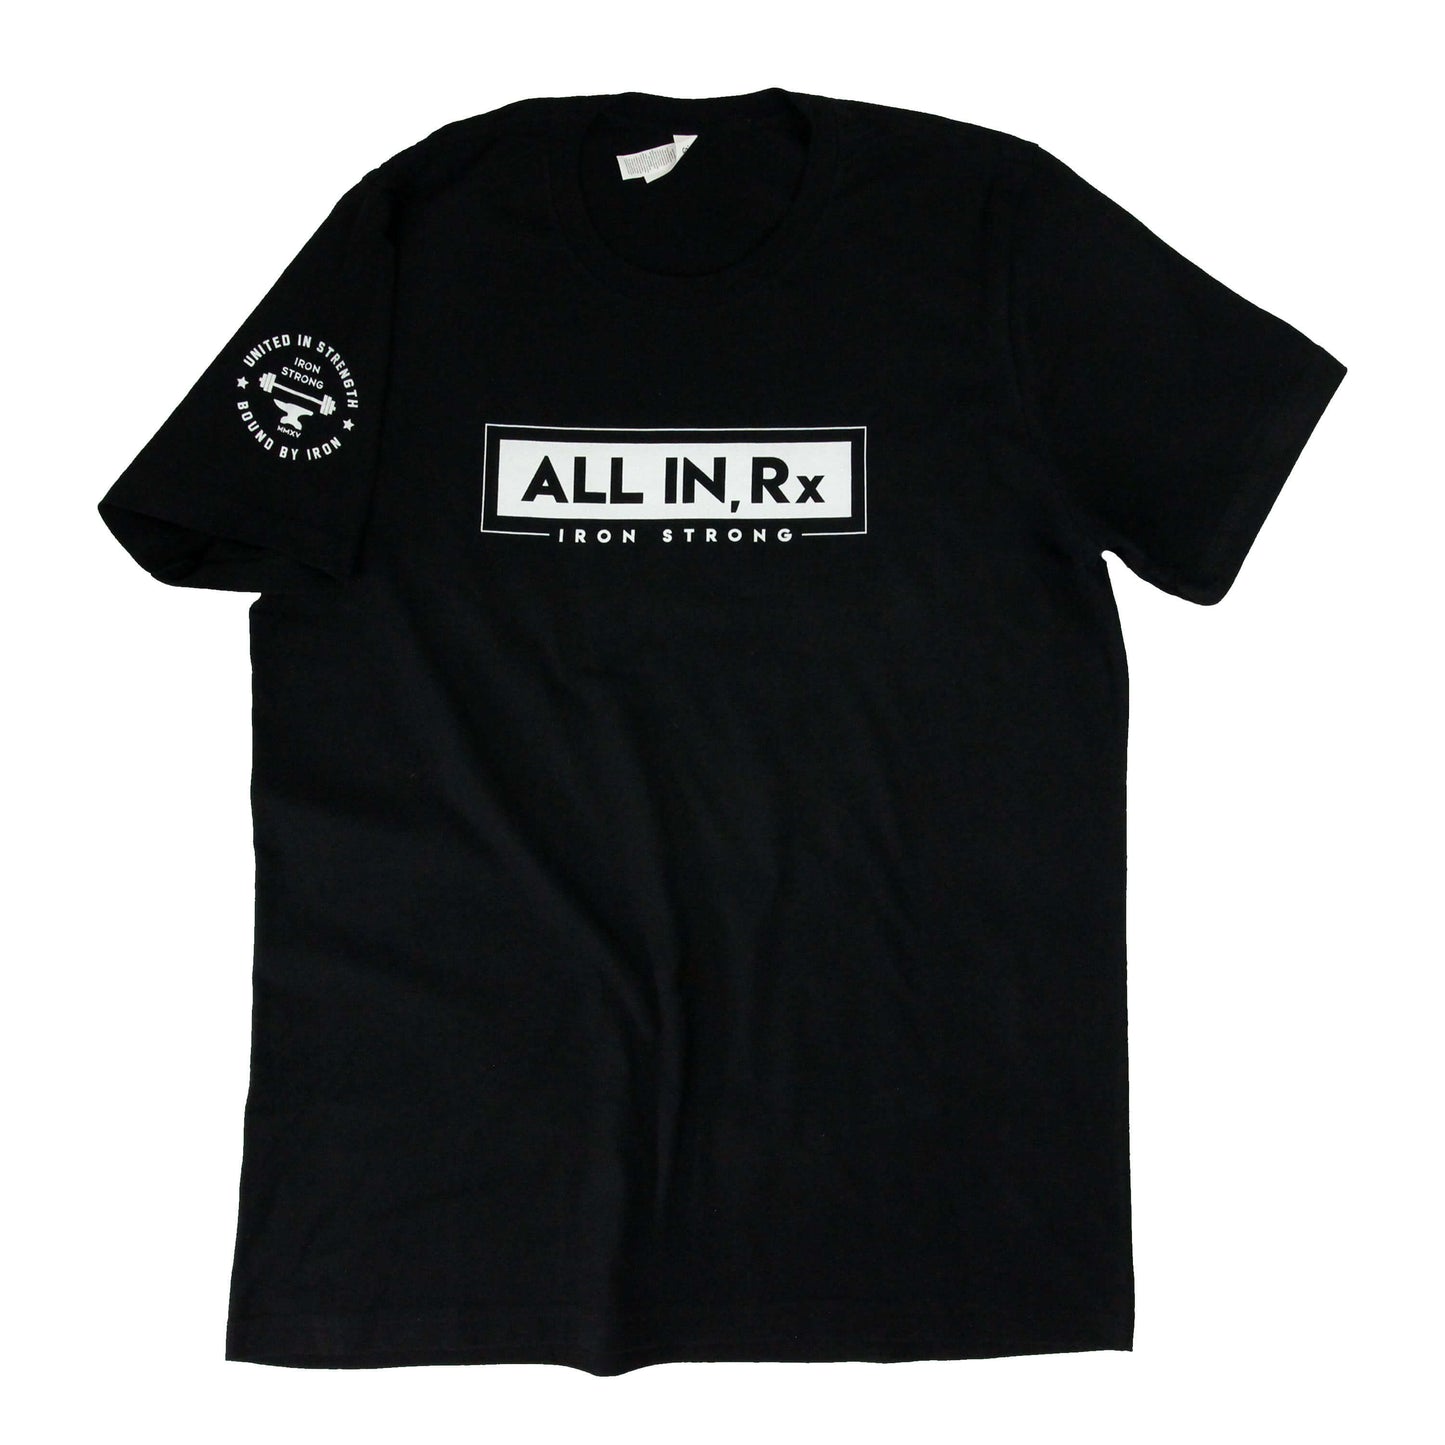 The 'All In, Rx' CrossFit Shirt sleeve | Iron Strong Apparel